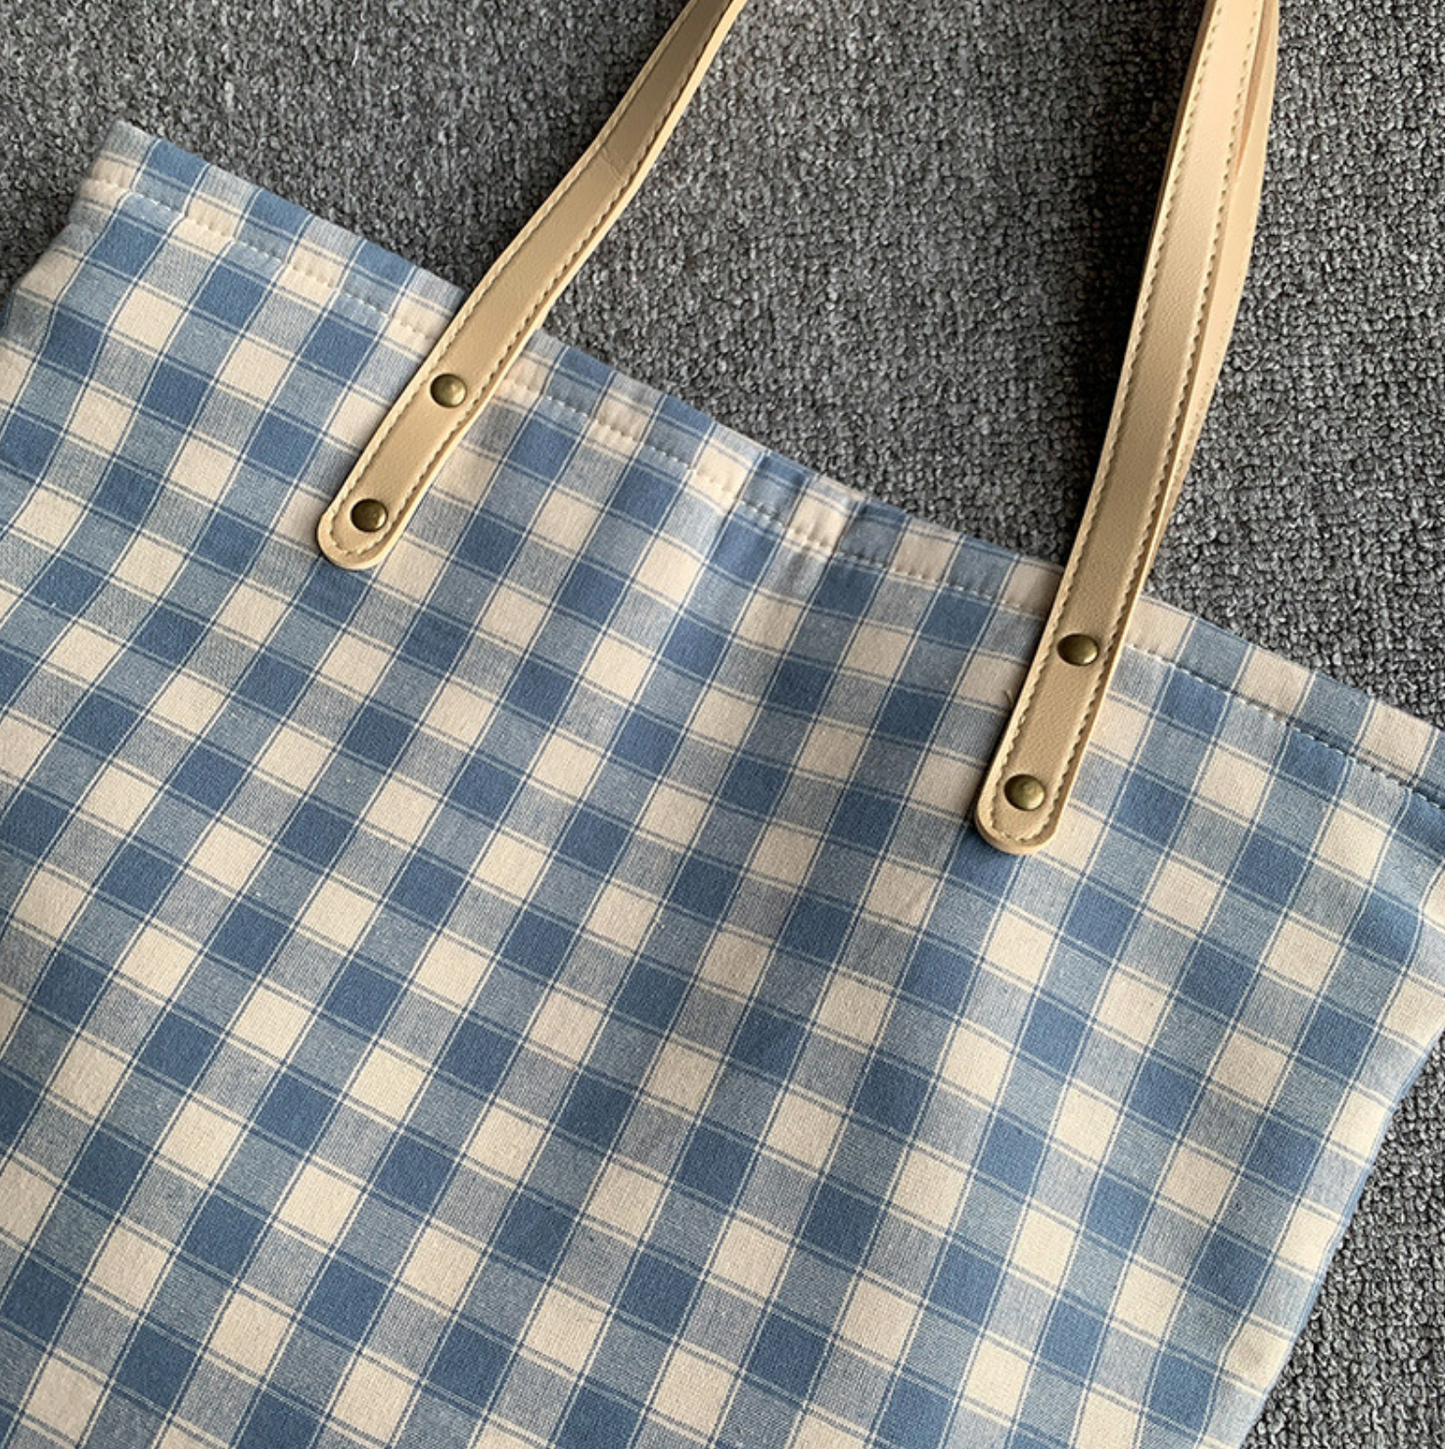 Blue & Black Pastel Checkered Bag with Leather Style Handle